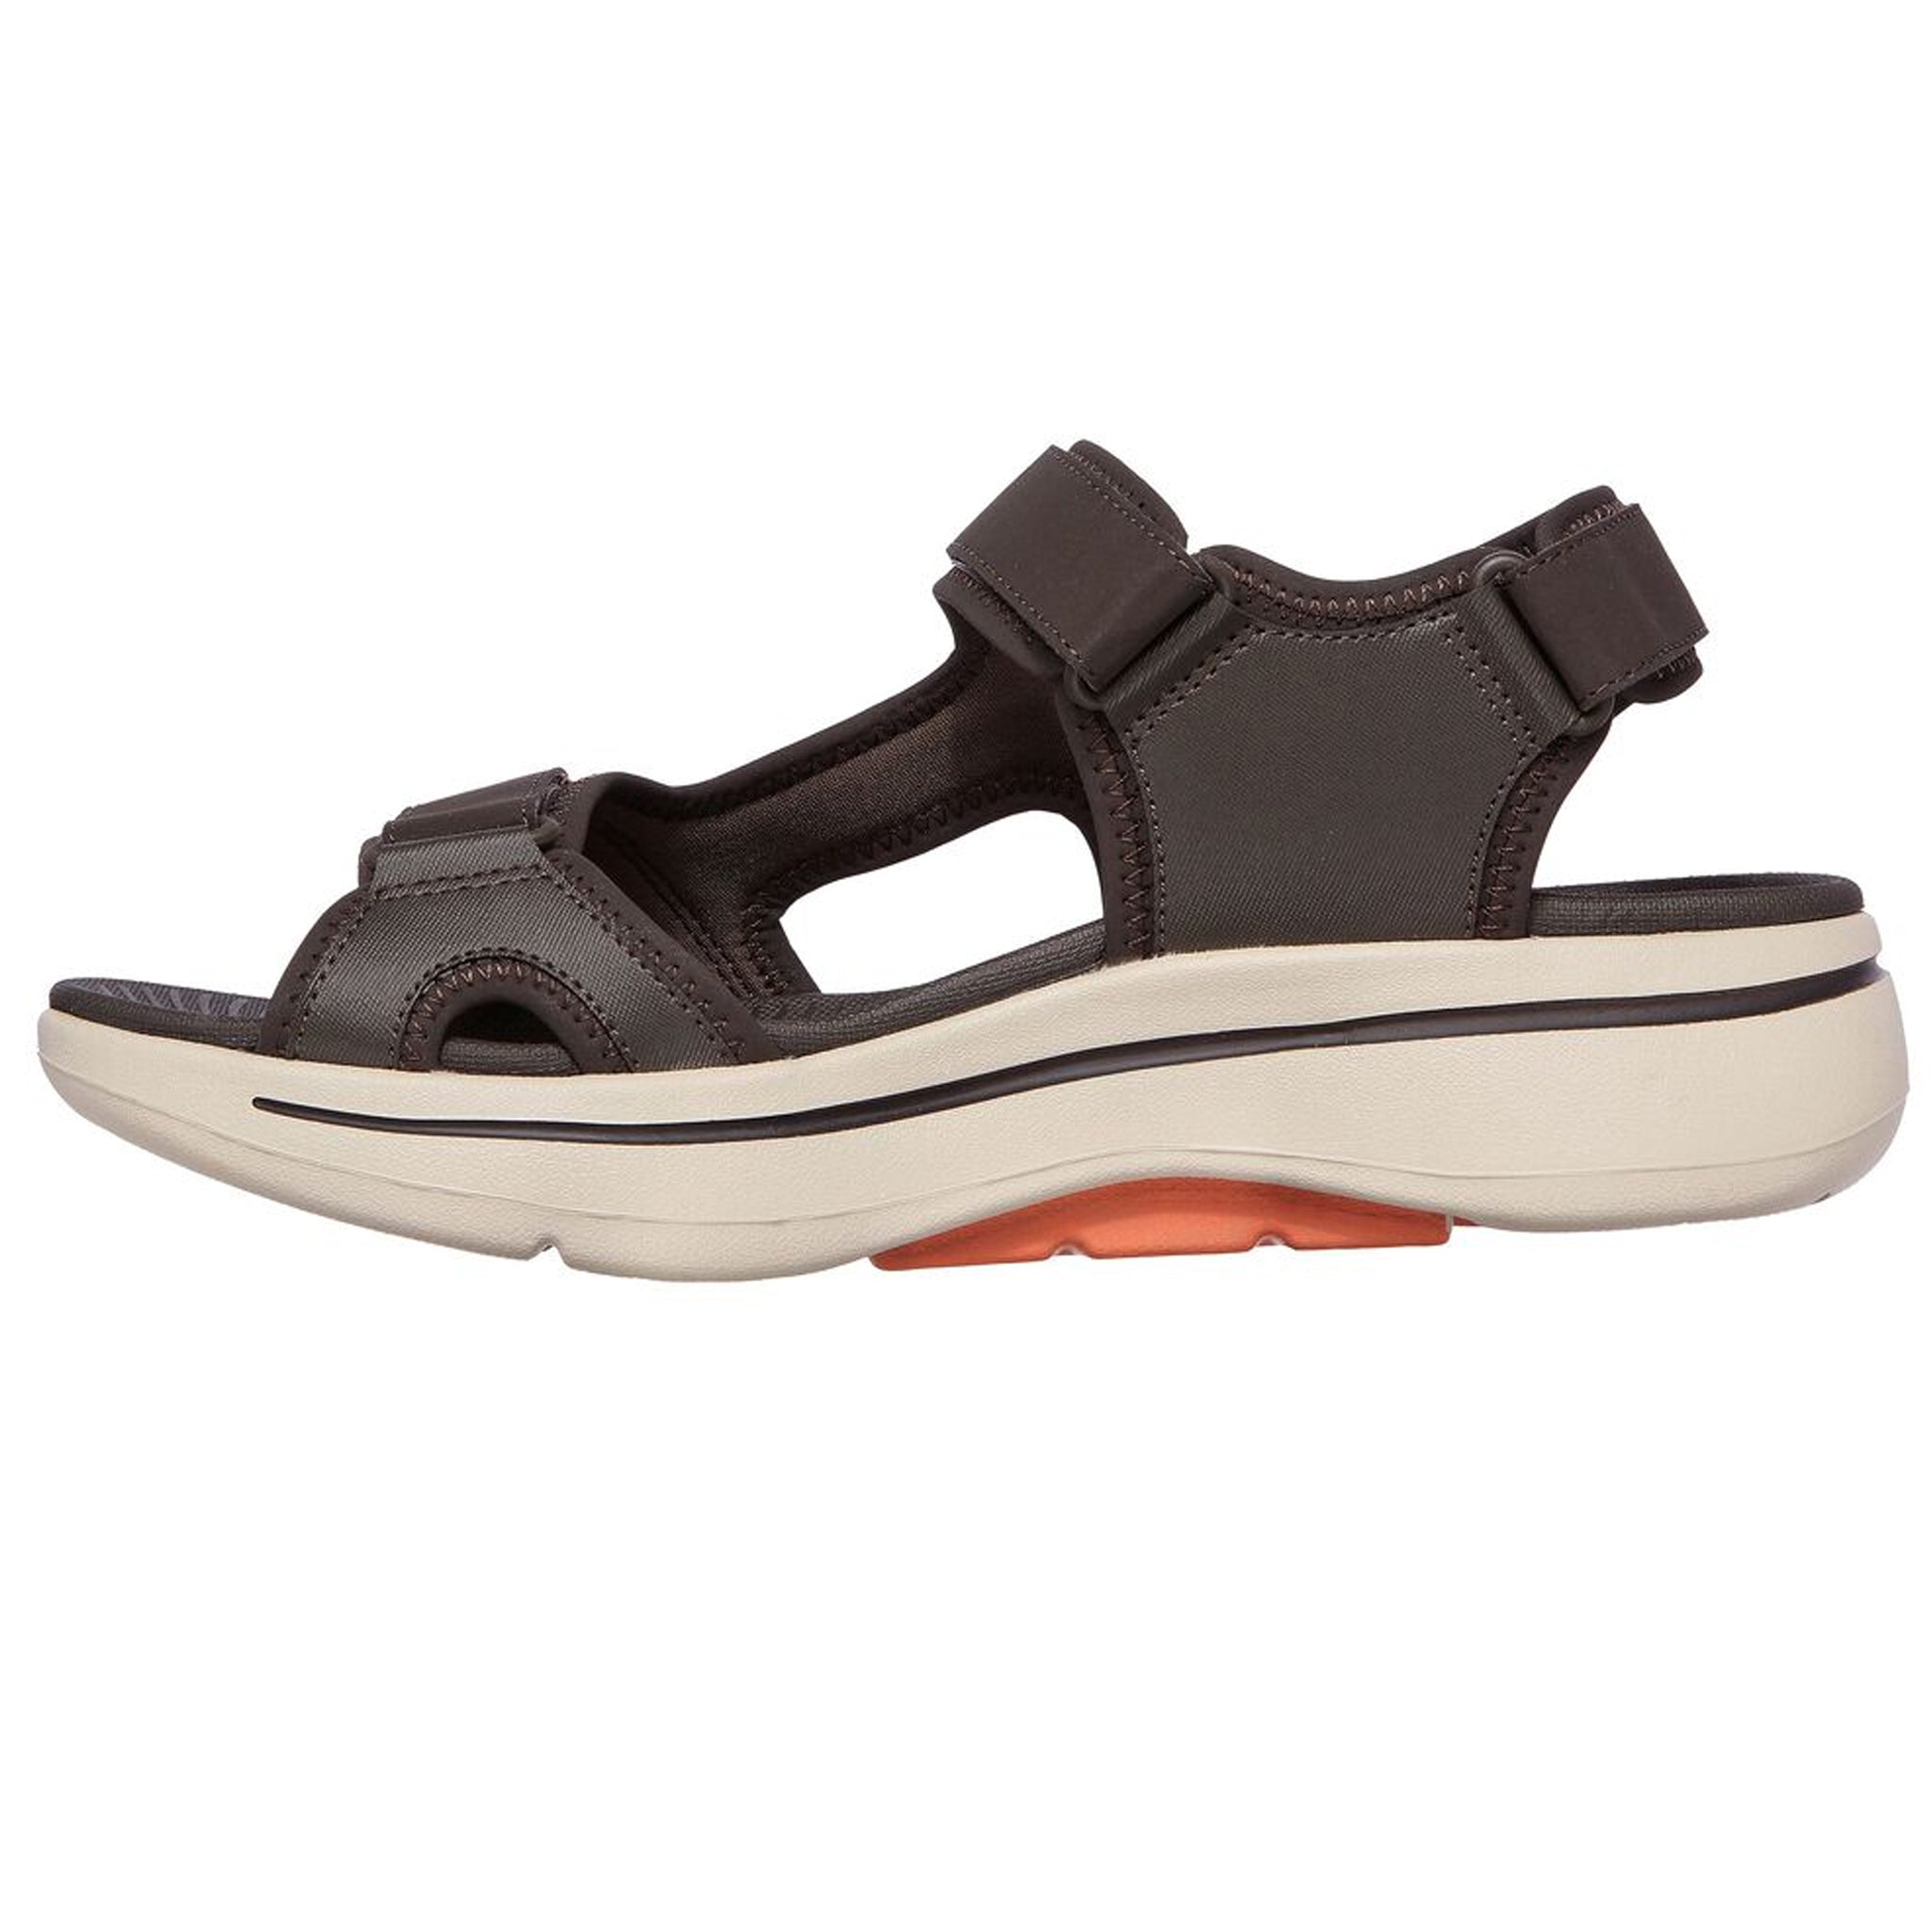 Skechers Go Walk Arch Fit Sandal Mission Strap Sandals – That Shoe Store and More